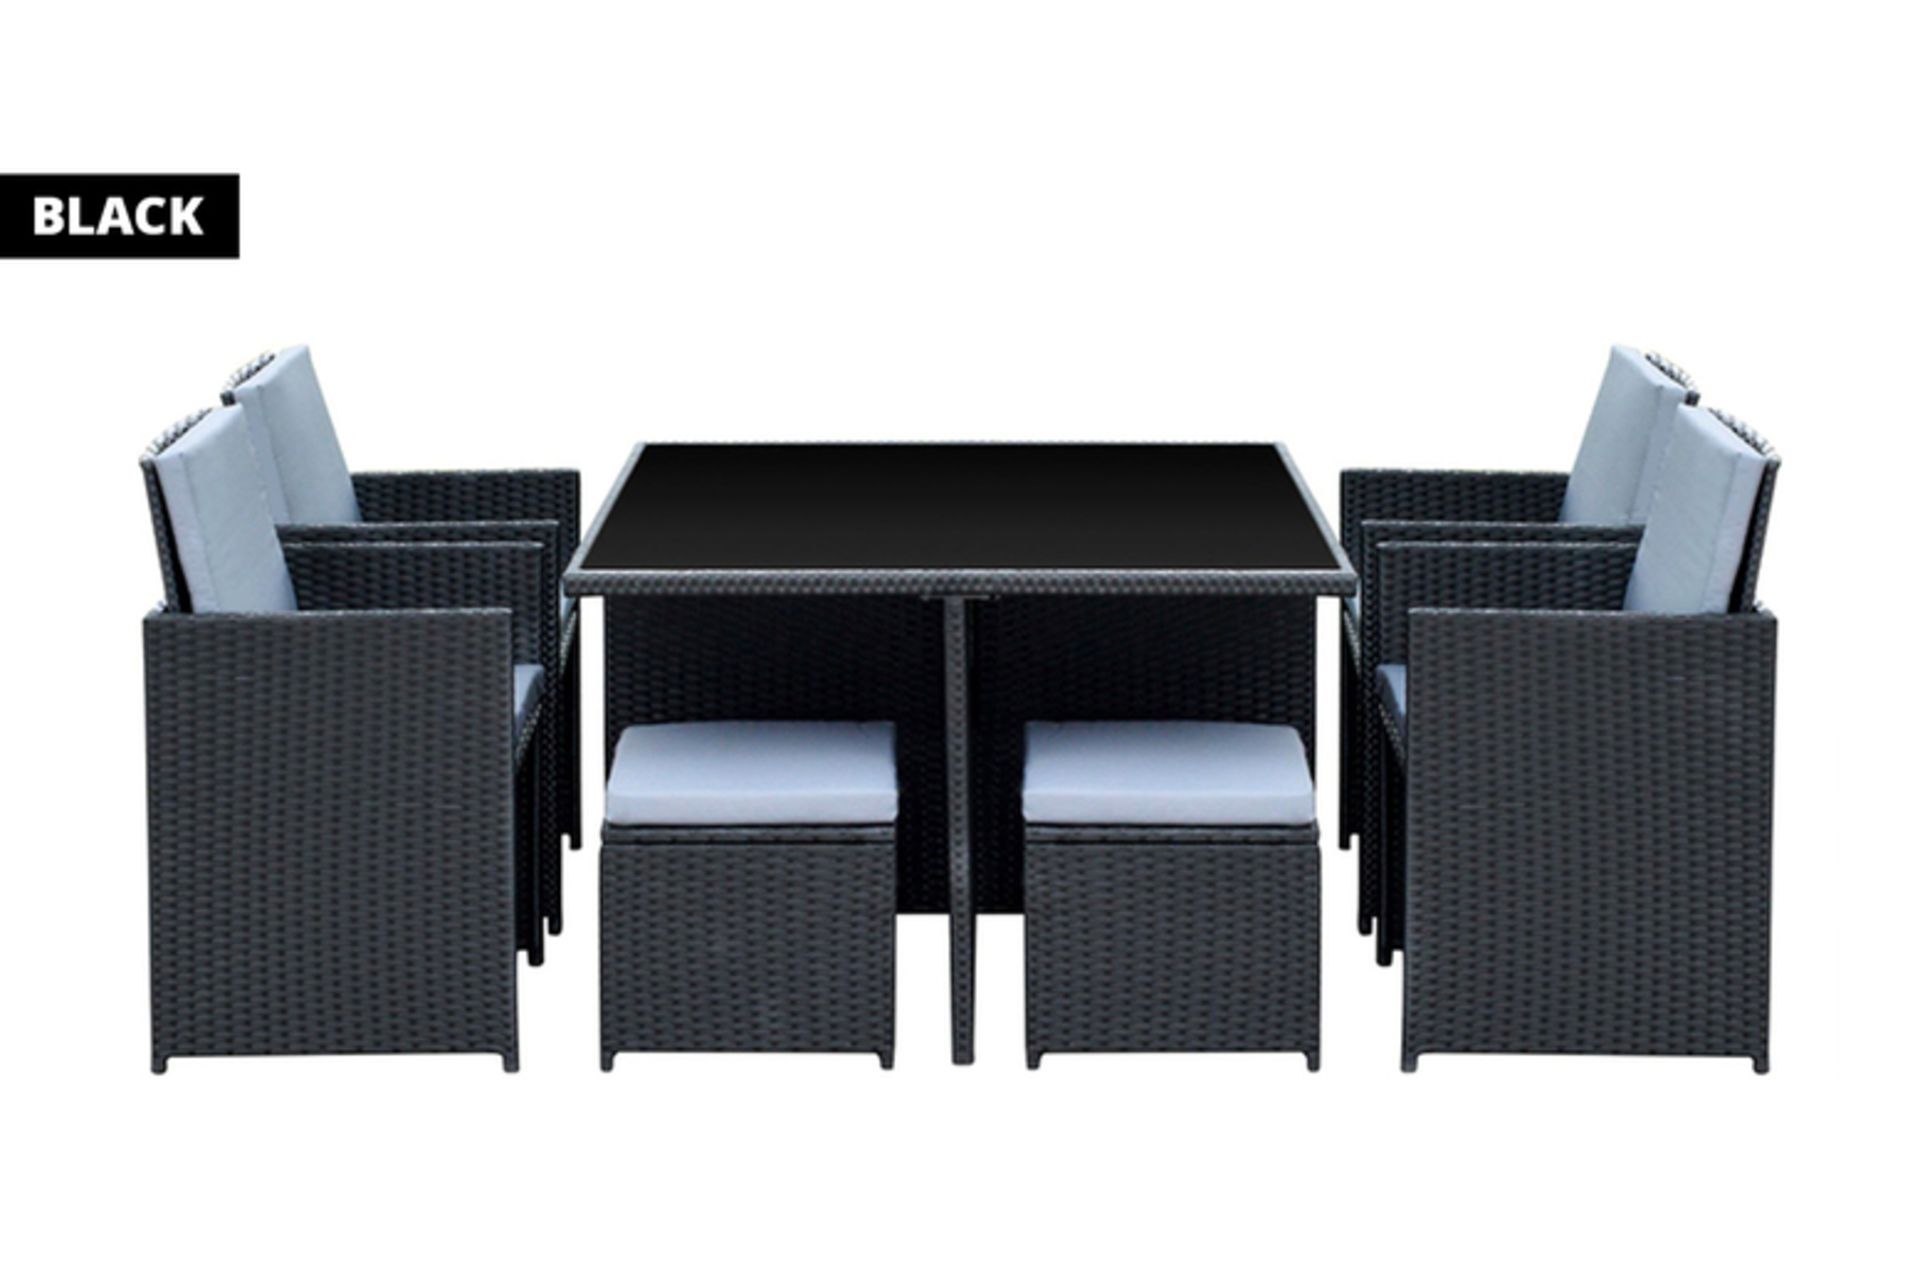 8-Seater Monument Rattan Cube Garden Furniture Dining Set - Black - Image 4 of 4